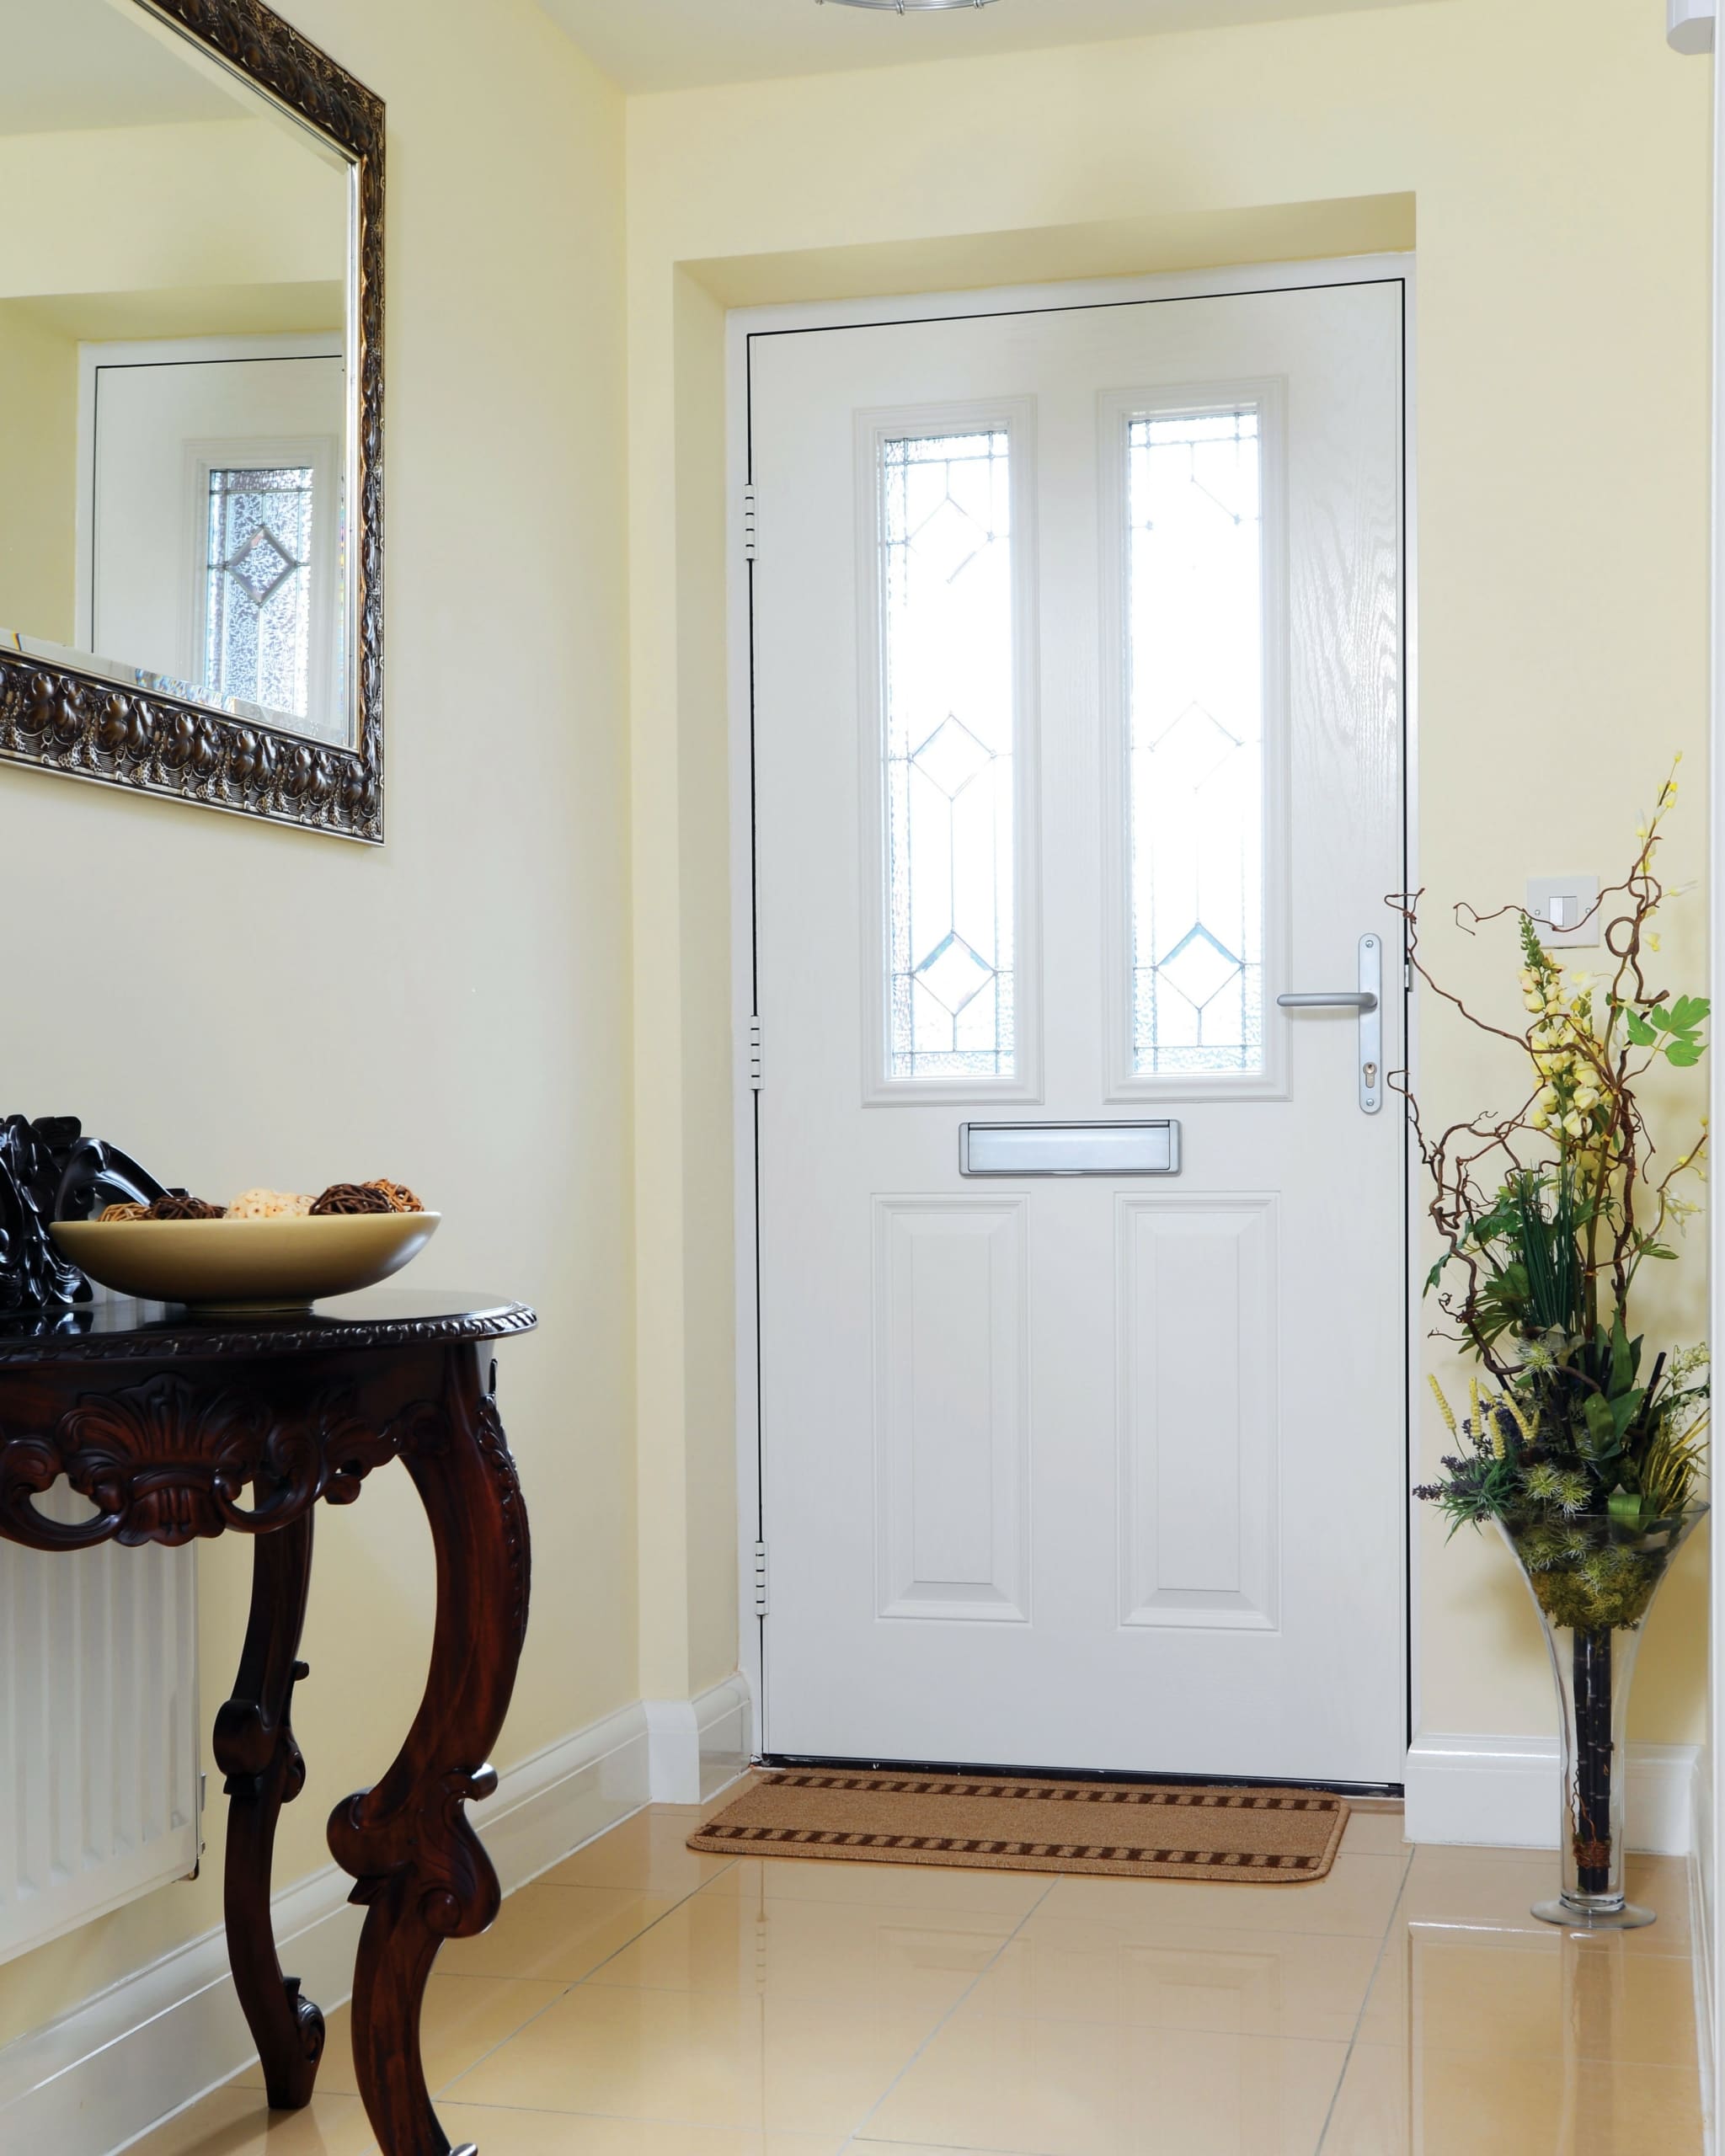 Hallway of a traditional home with a white front door and two windows with decorative design.